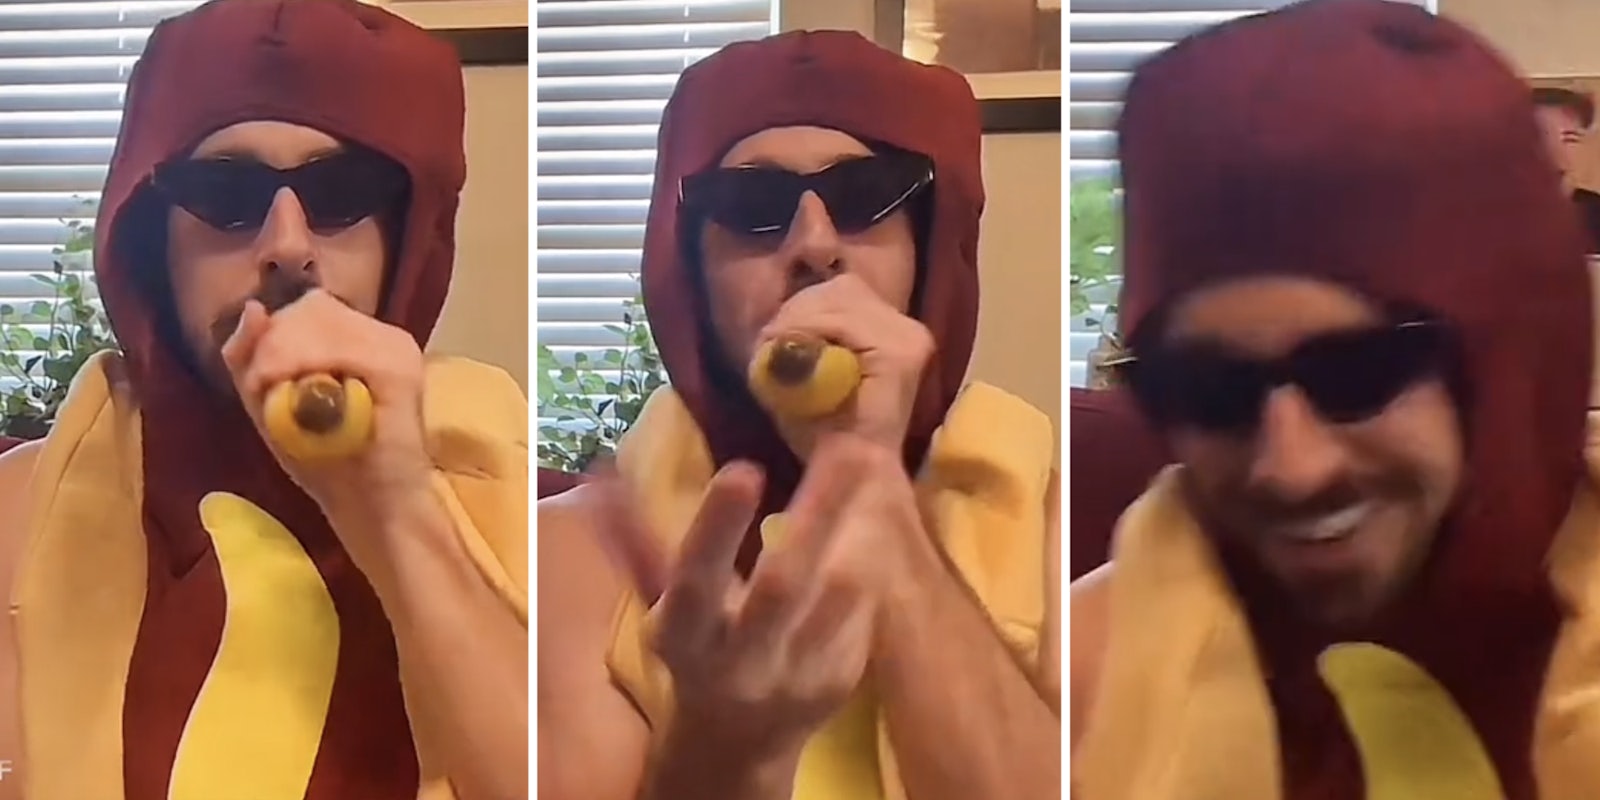 Three split of guy in a hot dog costume